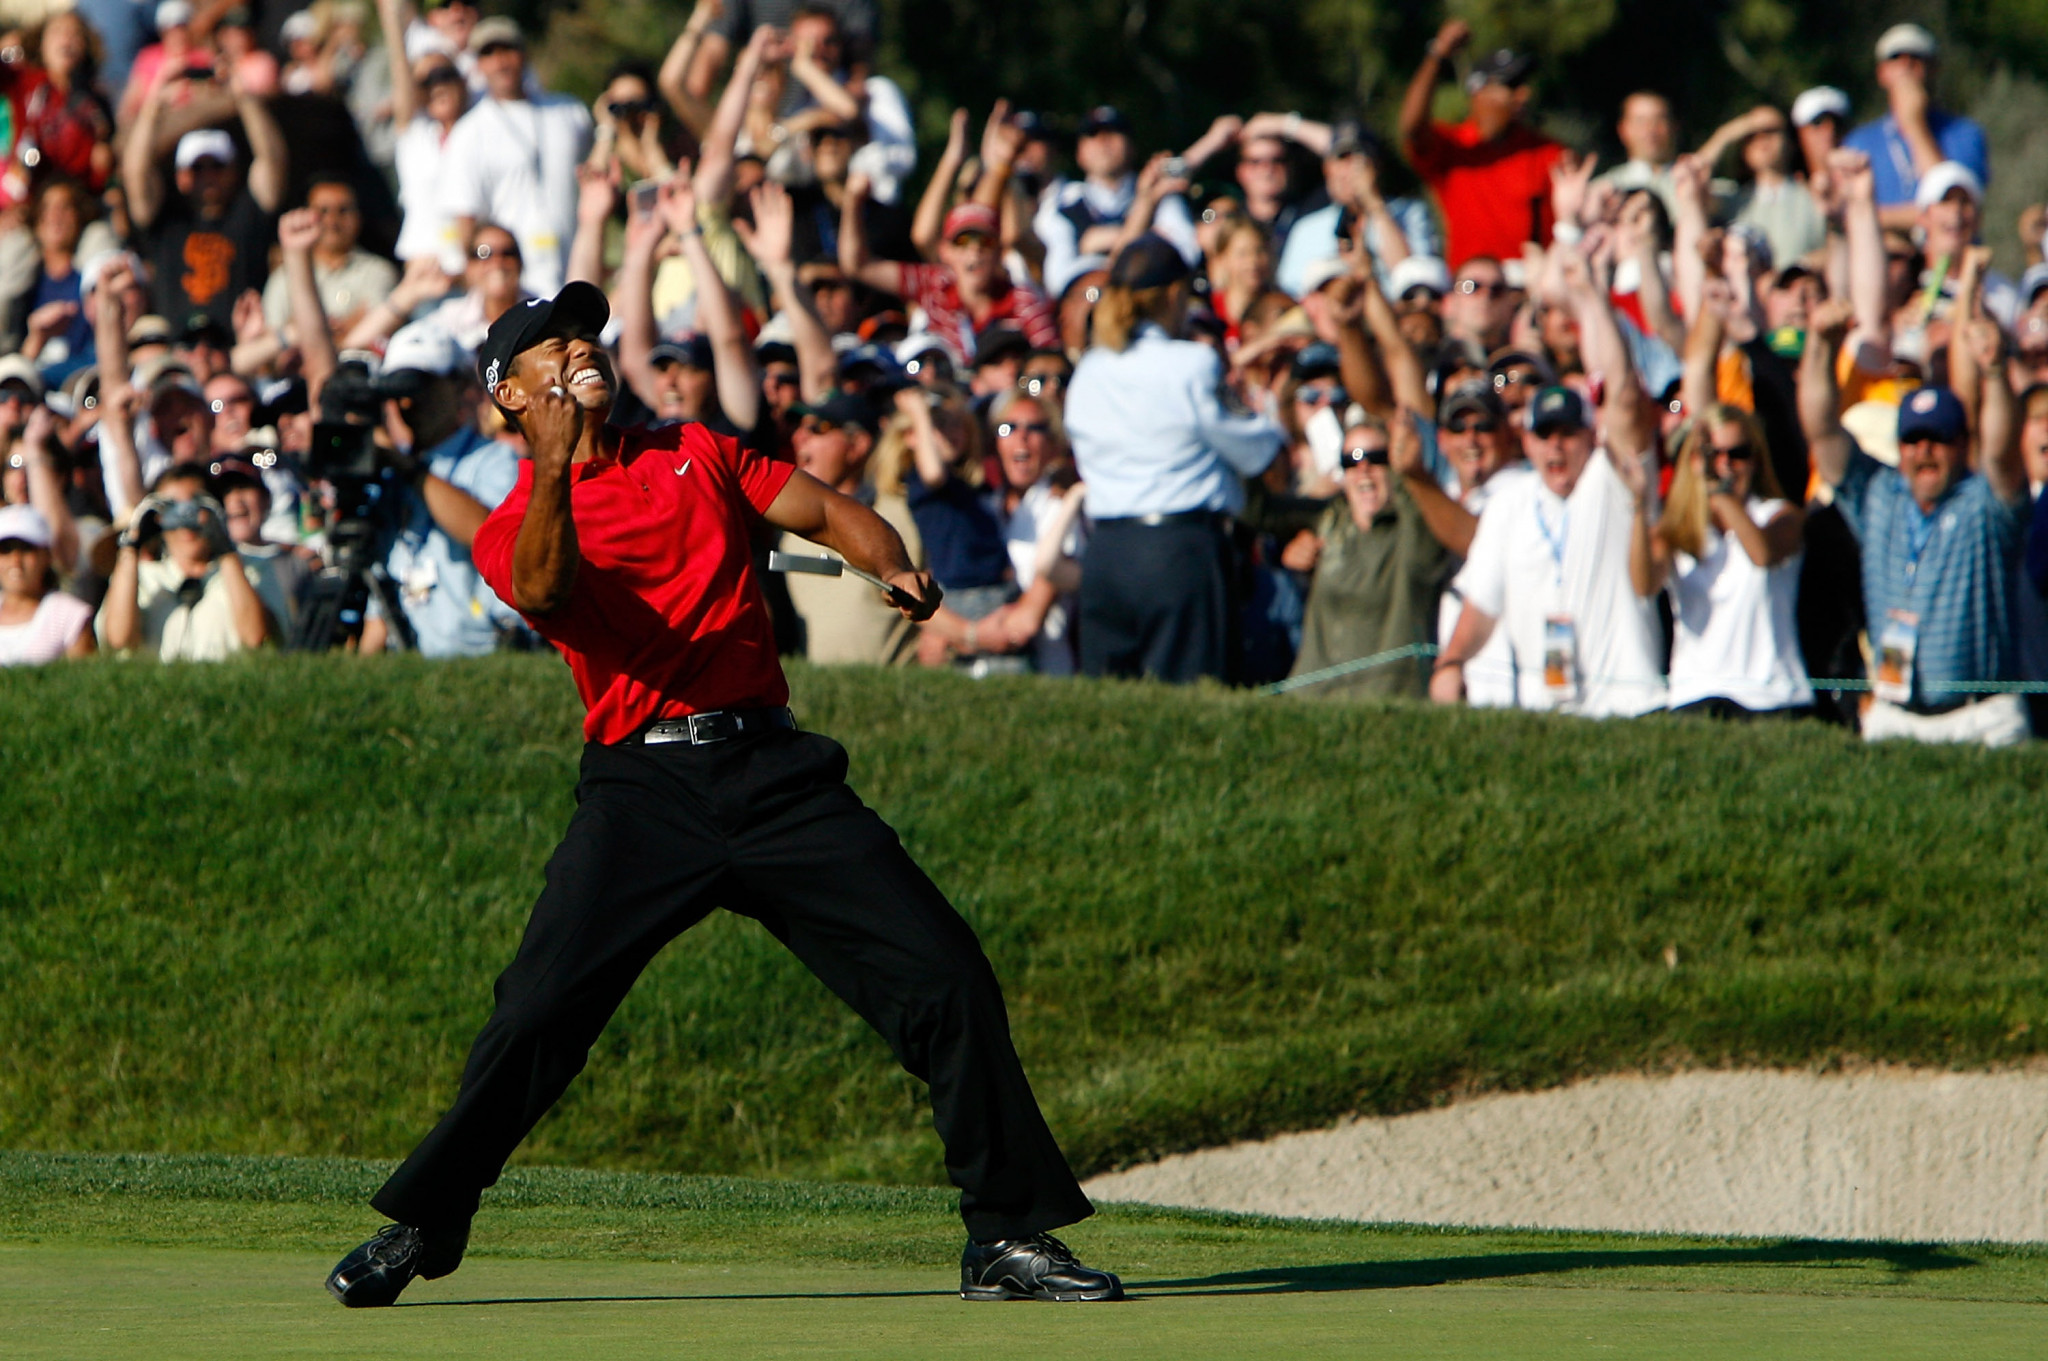 Tiger Woods beat Rocco Mediate in a playoff at the 2008 US Open at Torrey Pines  ©Getty Images